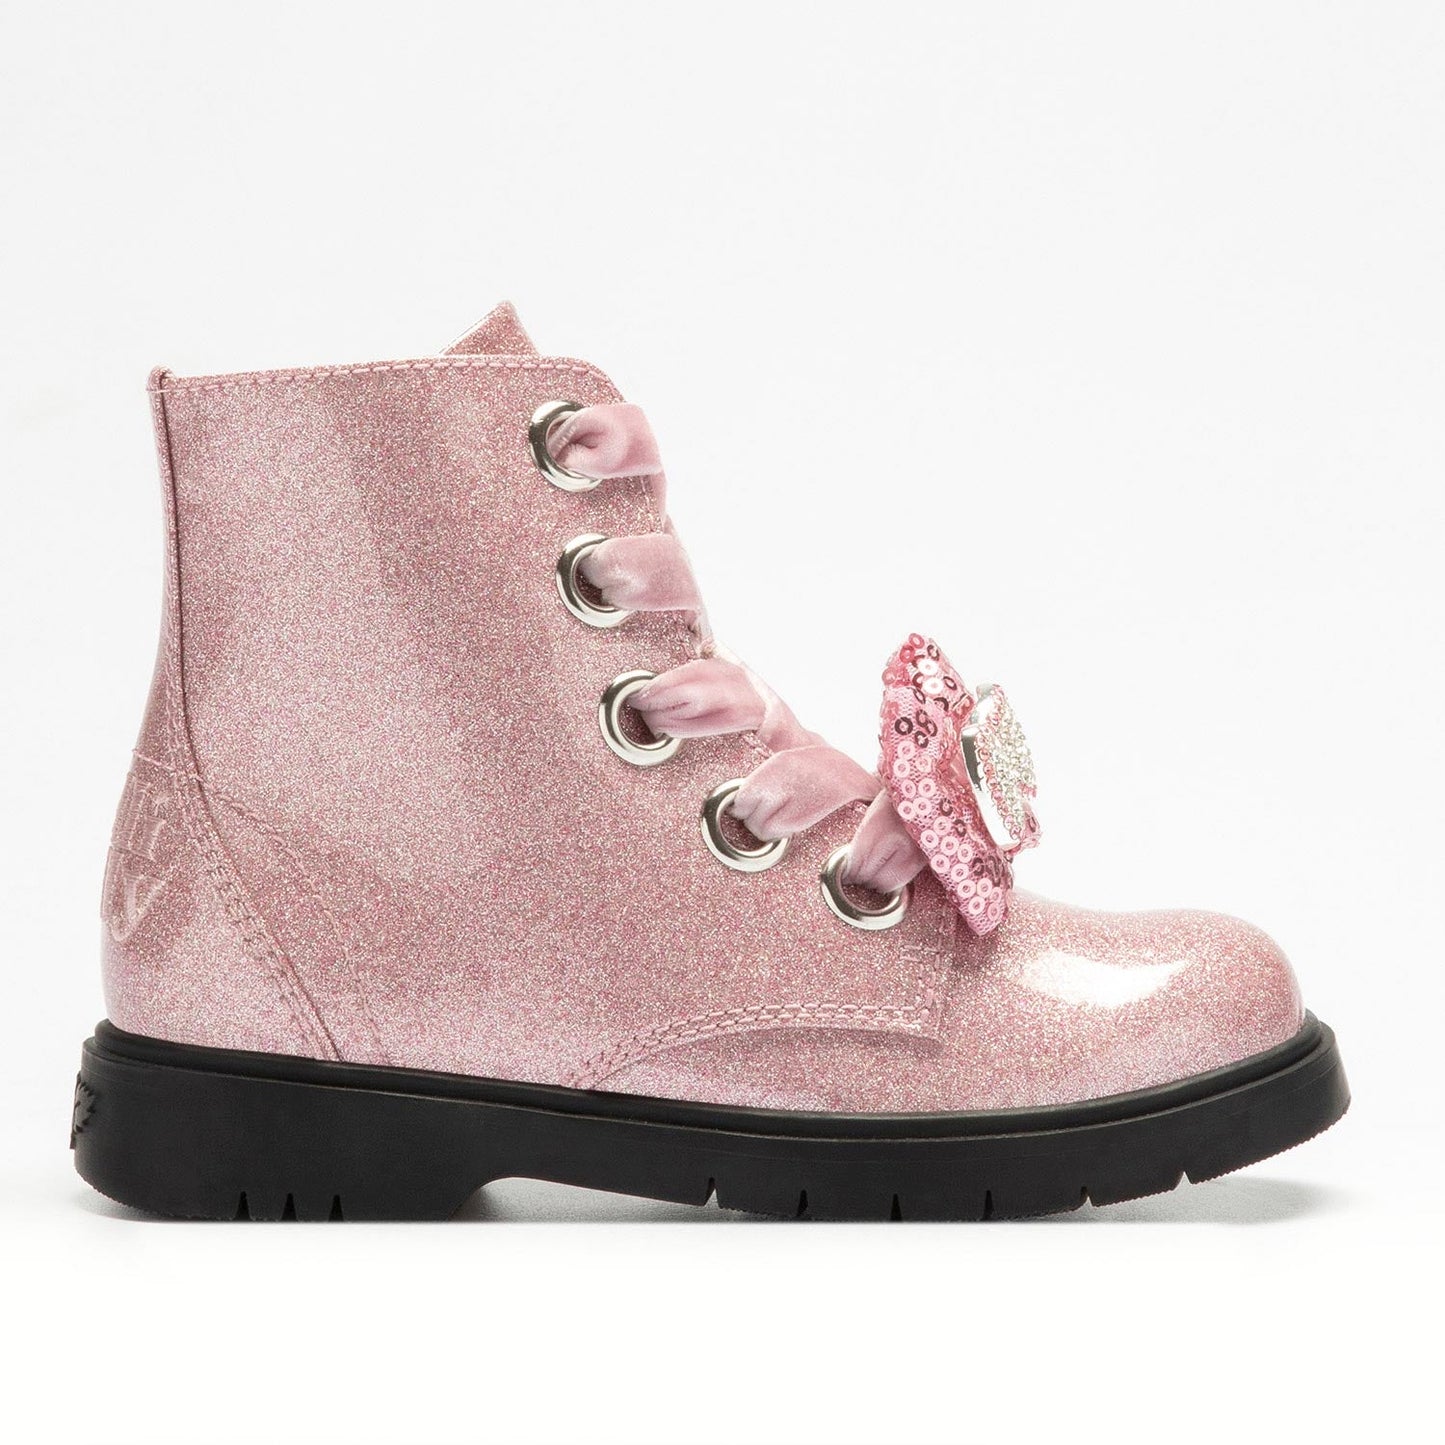 HF3736 Pink Glitter Bow Boot By Lelli Kelly